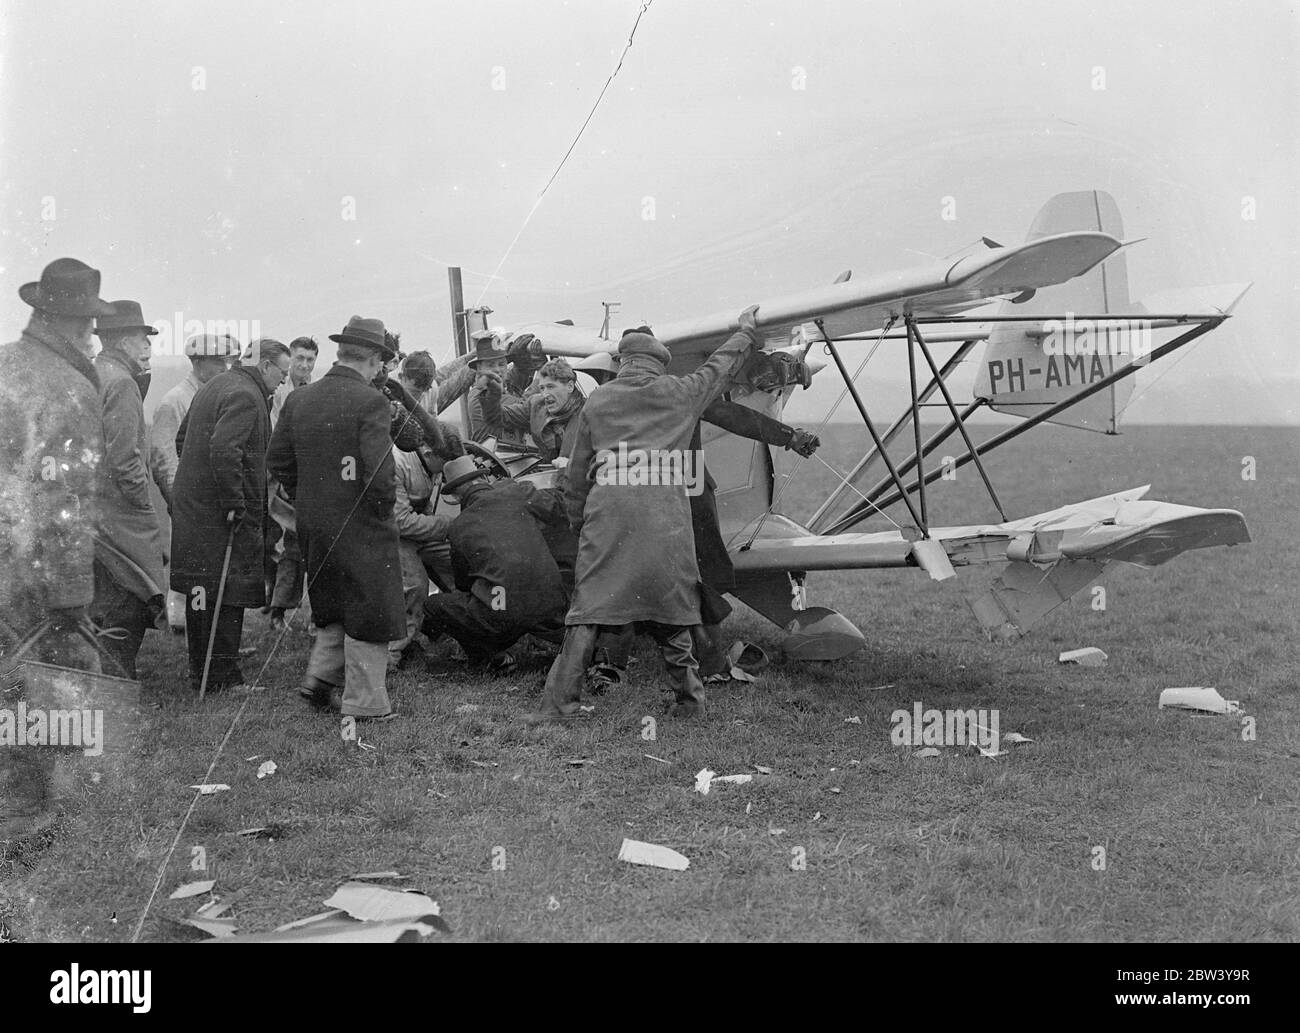 Fool-proof flights plane crashes at Gravesend Demonstration - pilot trapped in wreckage. The first demonstration in England of the Schelemusch, a Dutch light plane said to be full-proof, ended in a crash at Gravesend Aerodrome. The plane was piloted by Mr R. G. Doig who was injured. The machine was flying low and trying to make a sharp turn when it was caught by a gust of wind and completely wrecked. Mr Doig's leg was caught in the wreckage, the pilot having to wait until rescuers could extricate him. The Schelemusch, [de Schelde Scheldemusch] a singles-seater, is fitted with a 40 horsepower t Stock Photo